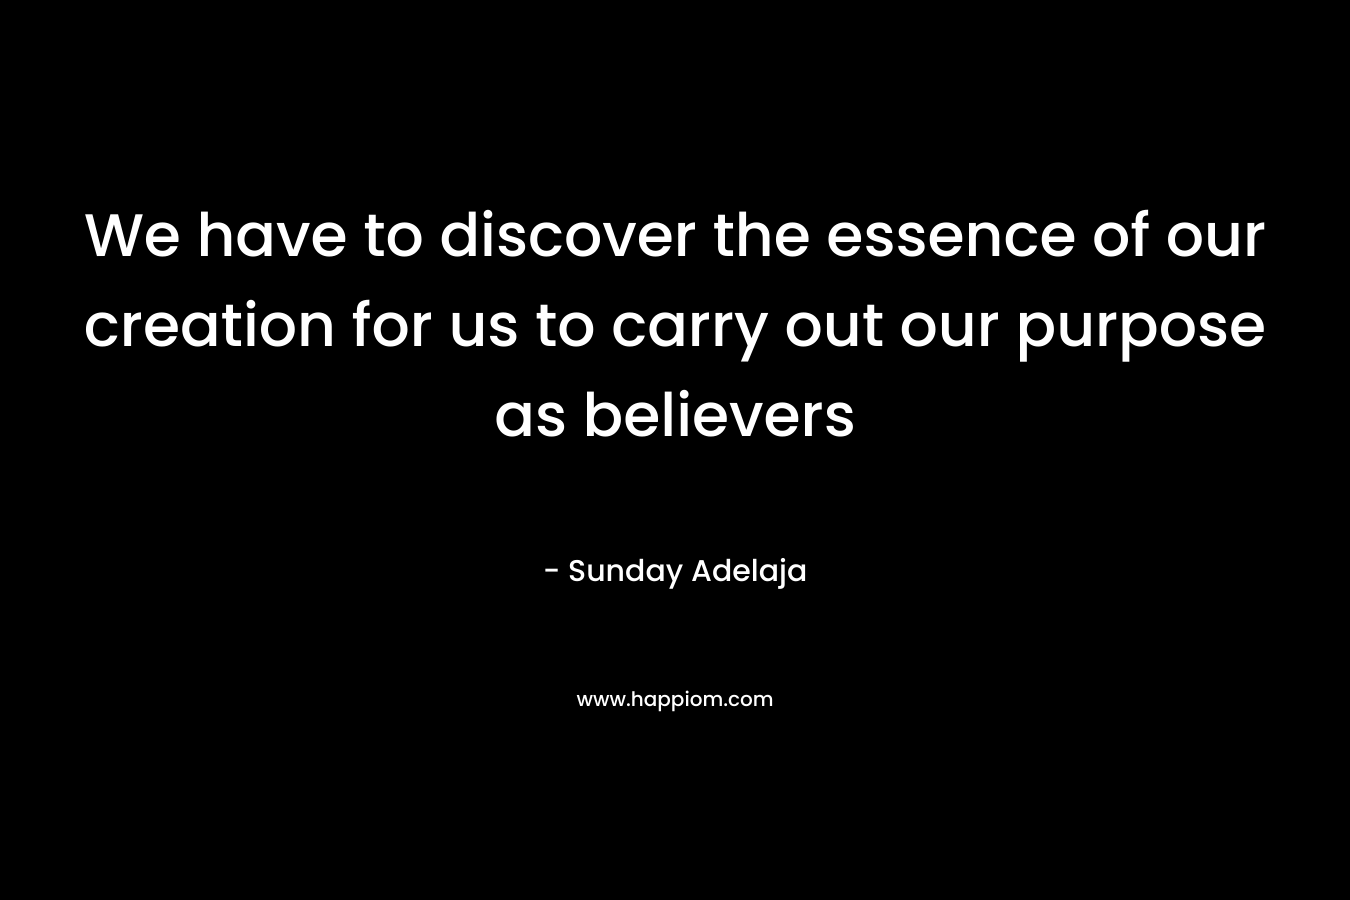 We have to discover the essence of our creation for us to carry out our purpose as believers